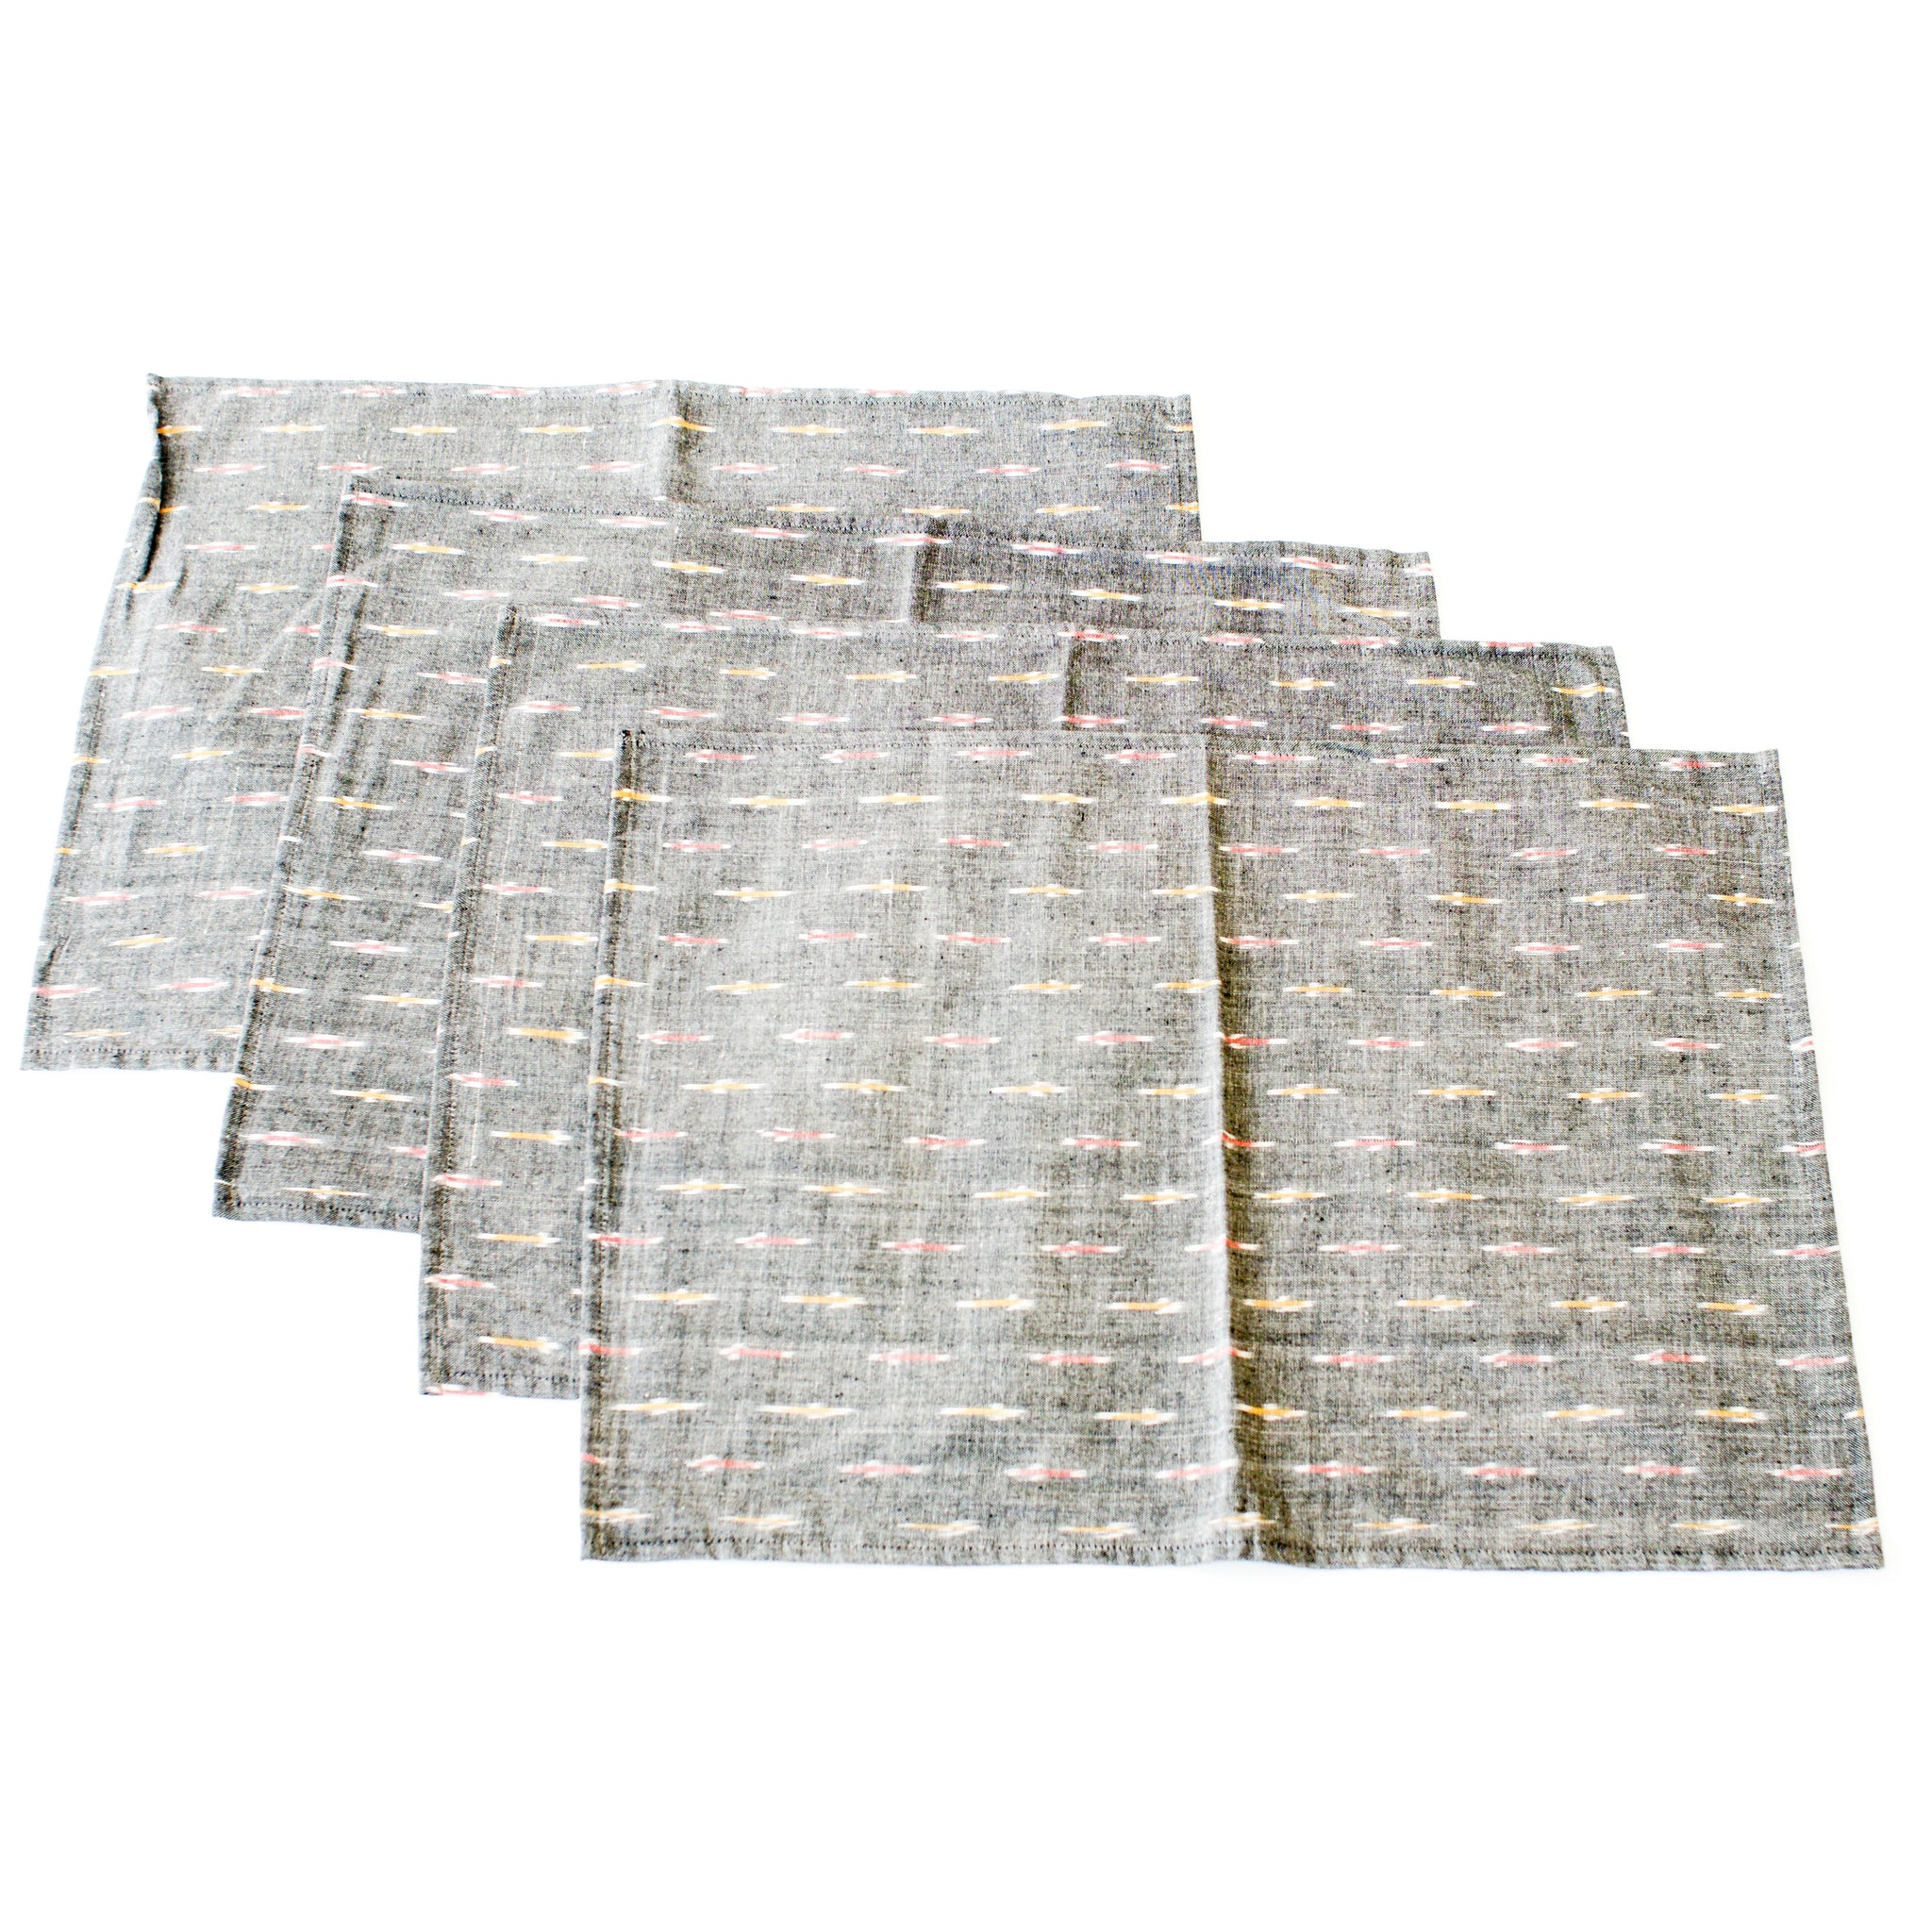 Ikat Cotton Cloth Placemat Grey Red Gold Dash Set of 4